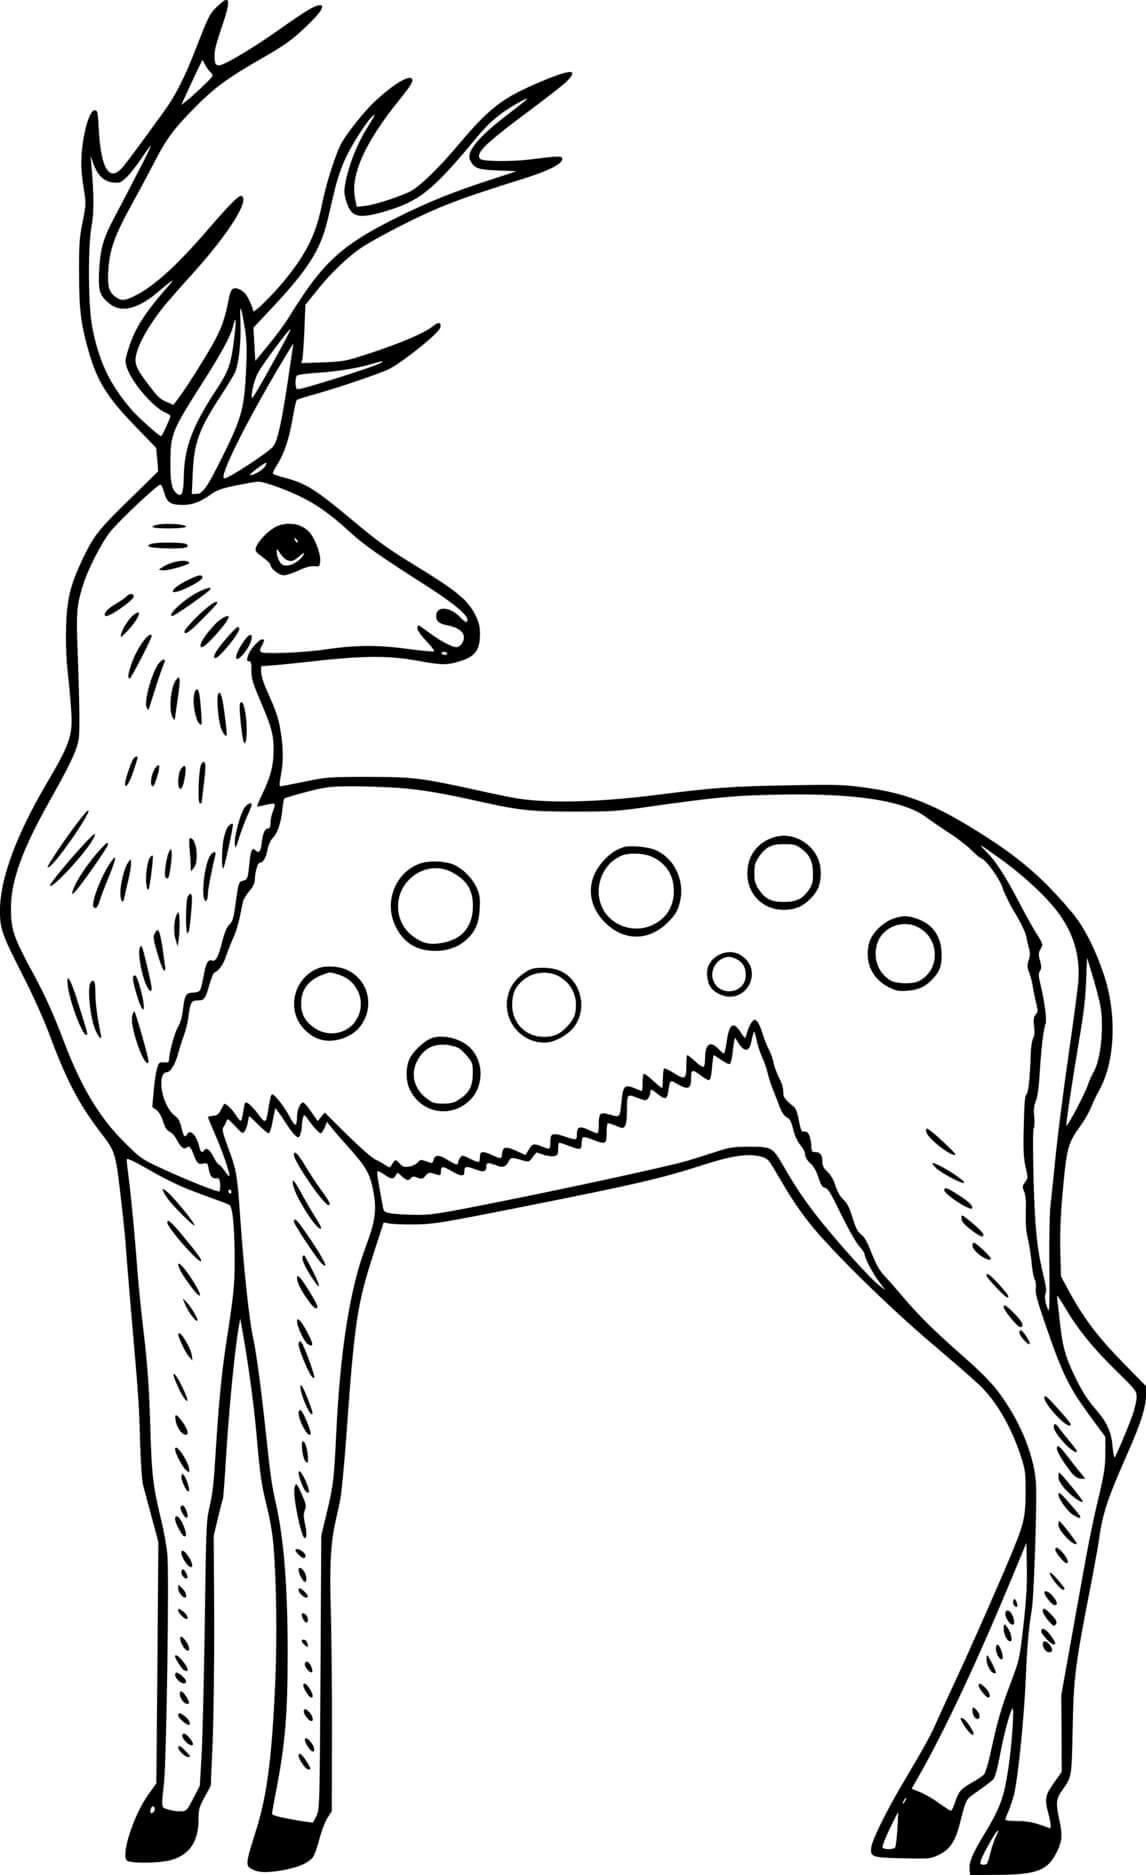 Male Sika Deer Coloring Page